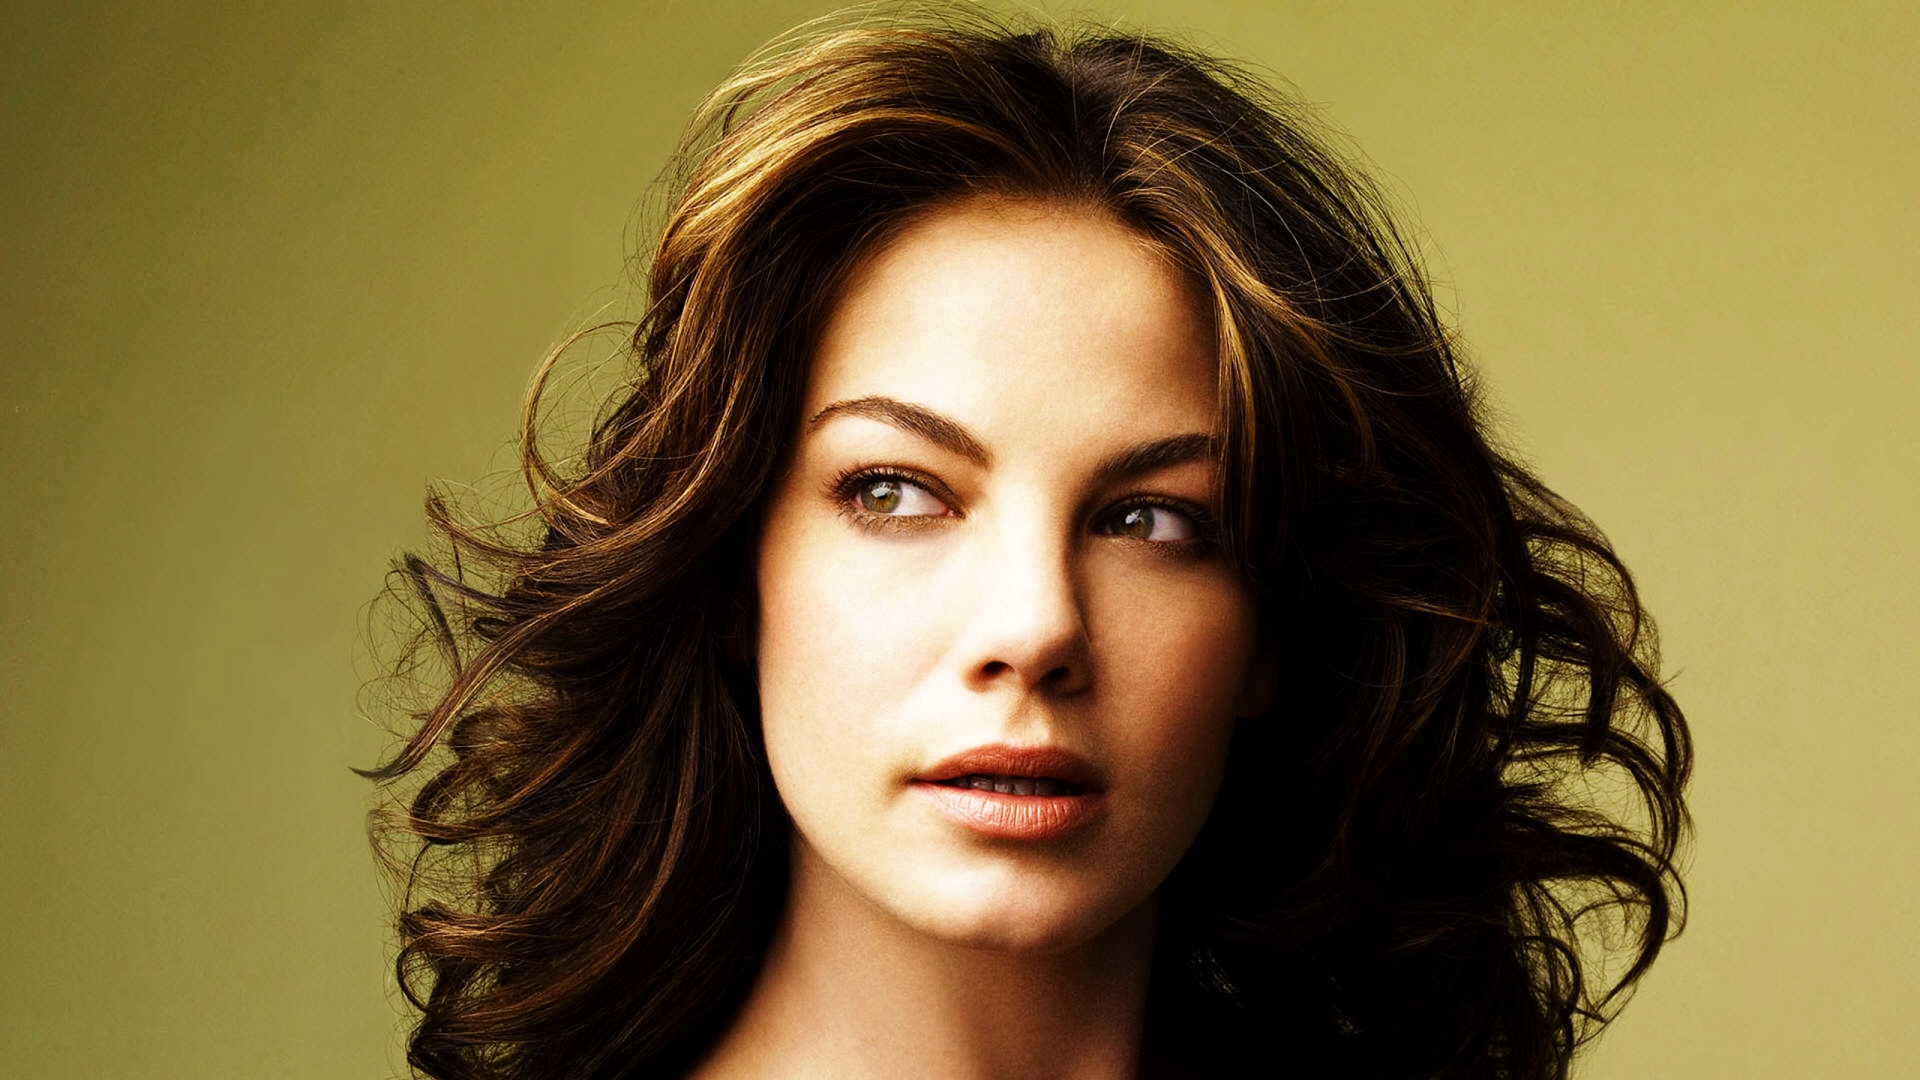 Michelle Monaghan for 1920 x 1080 HDTV 1080p resolution